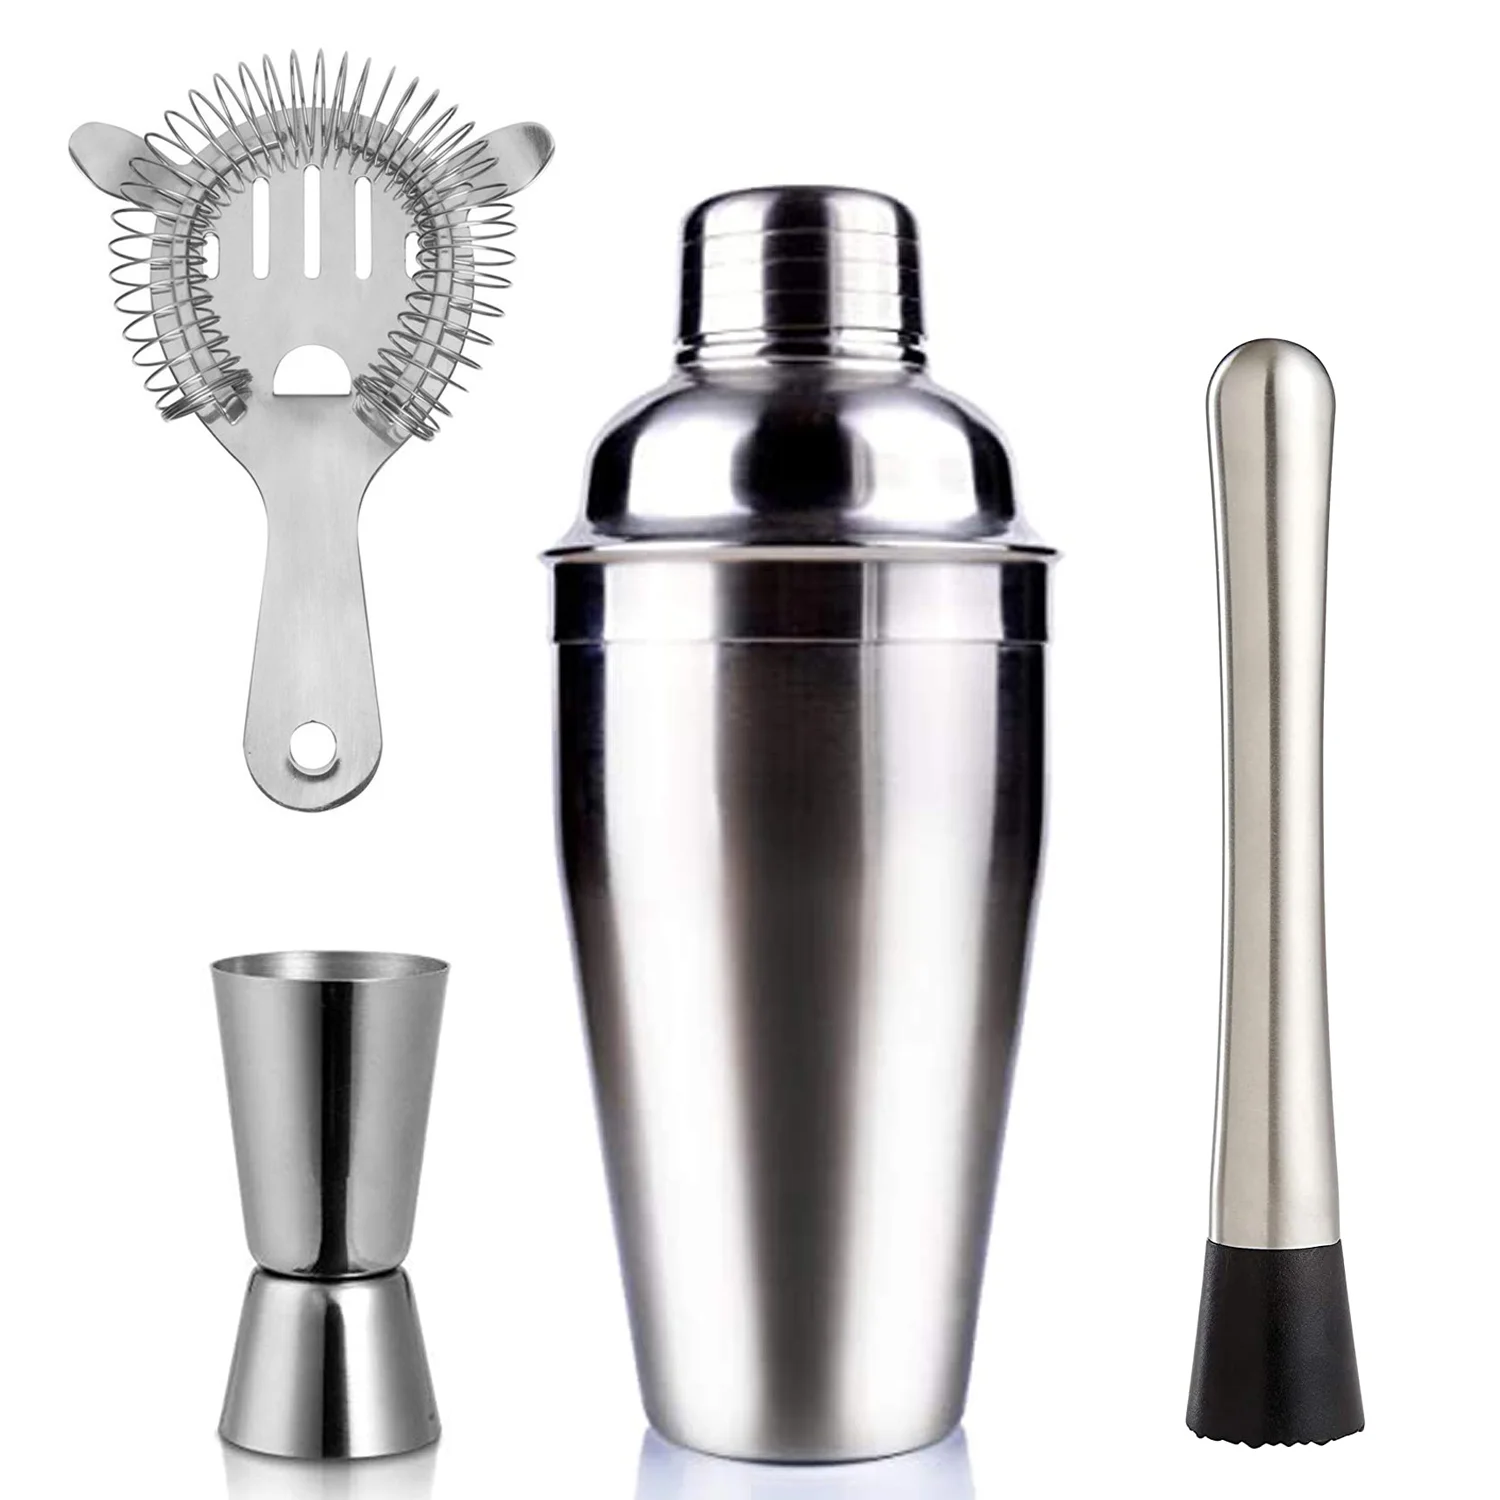 The Tidy Bar Cocktail Shaker Set